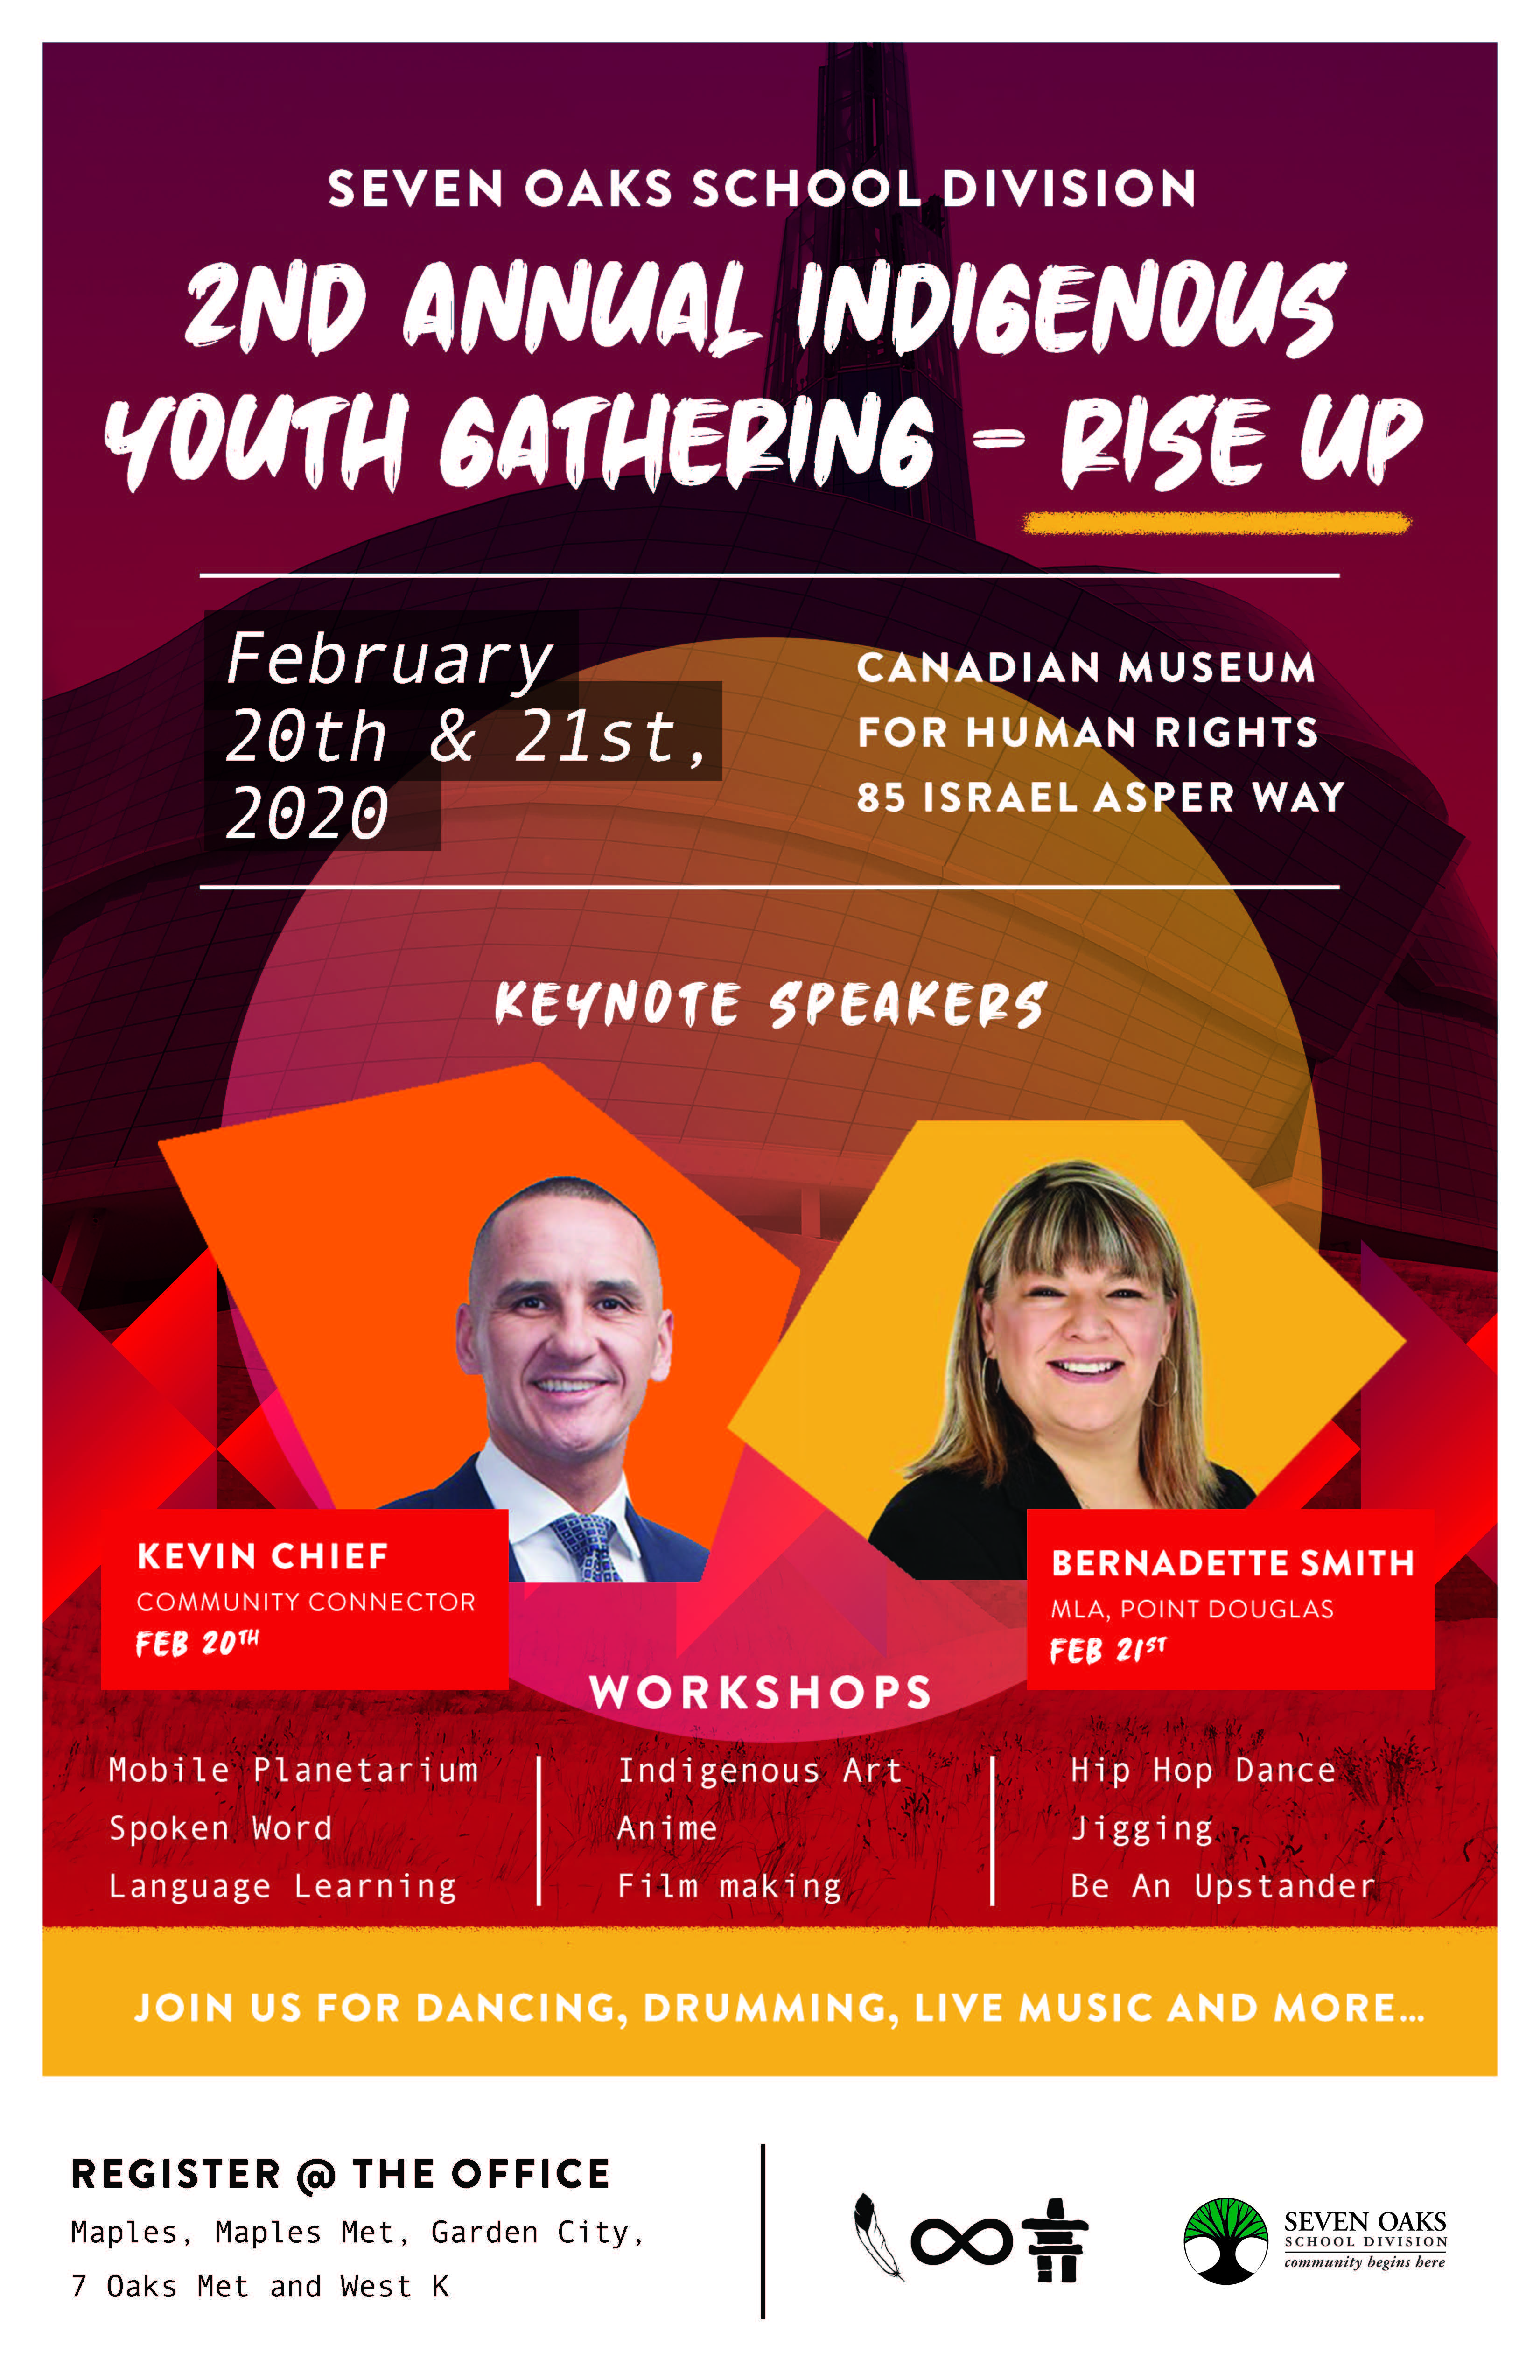 2nd annual Youth Gathering Poster.jpg